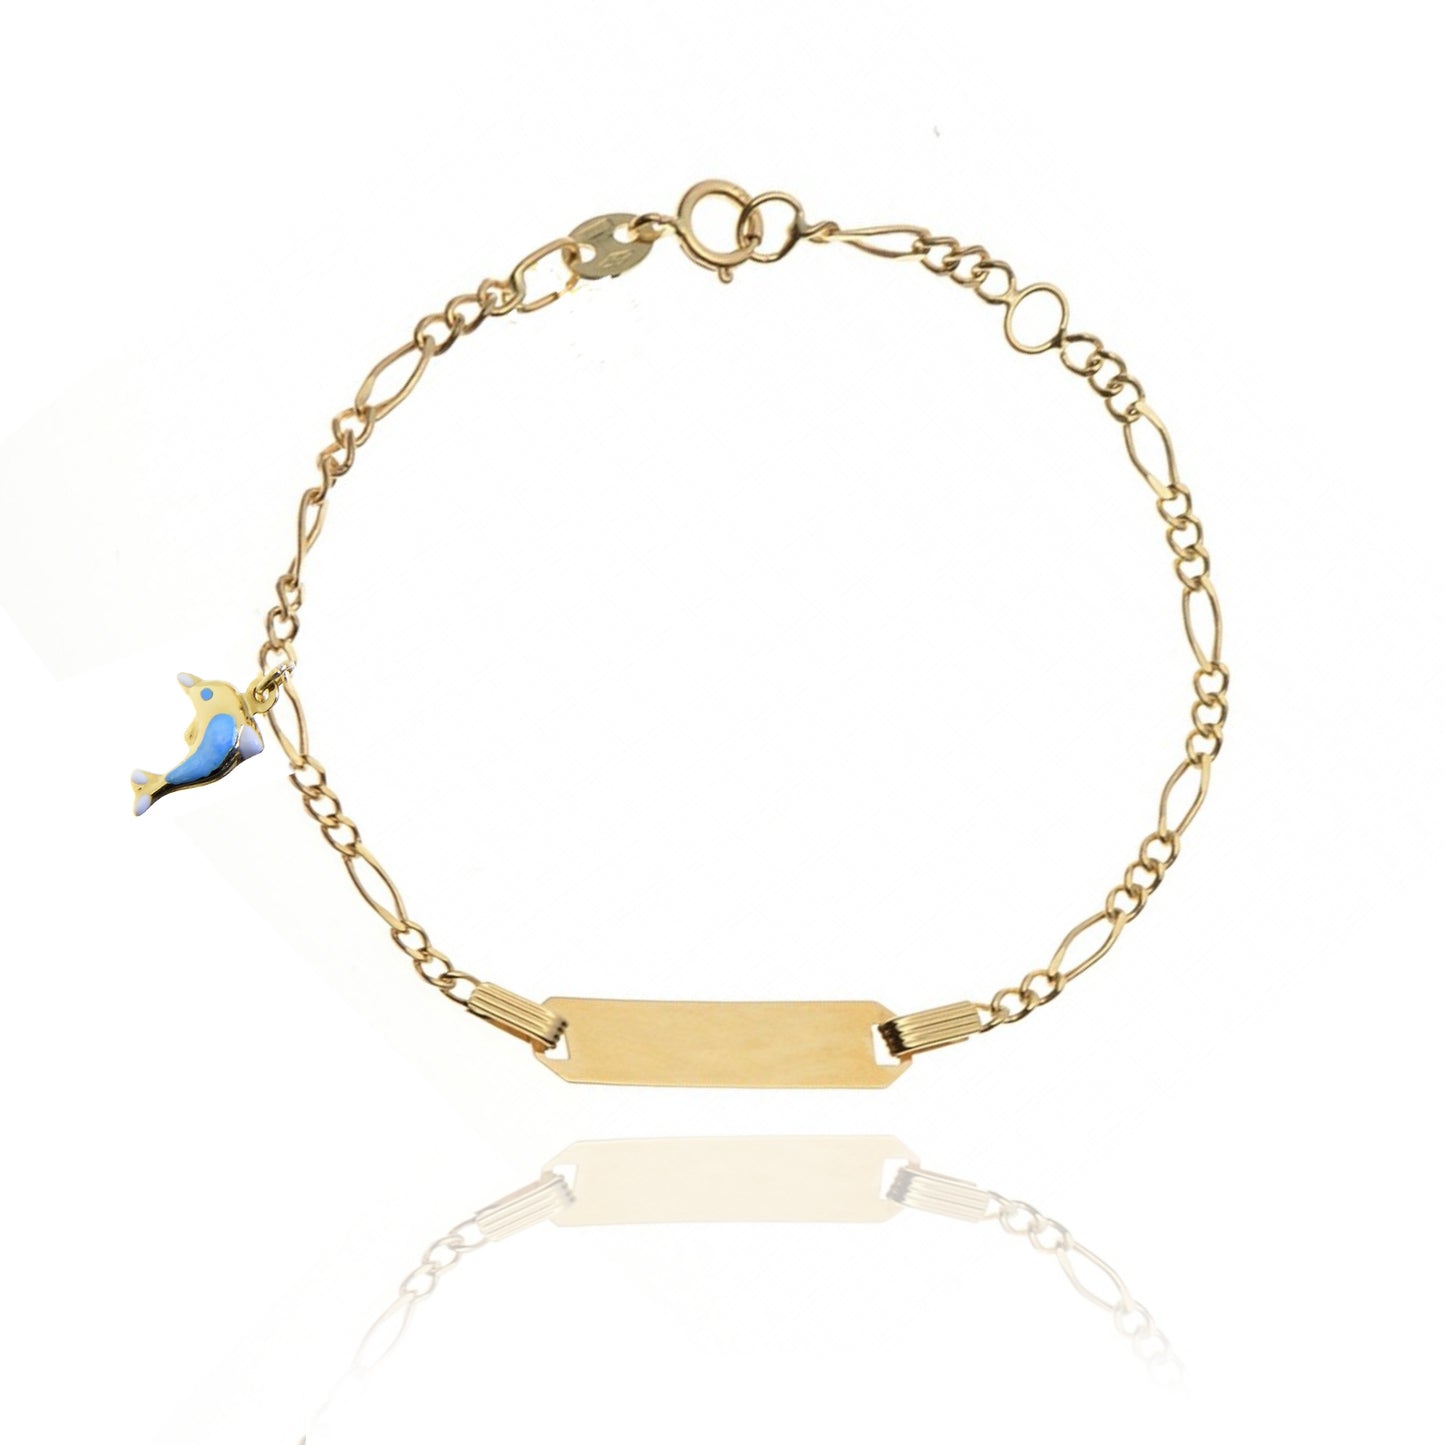 Dolphin Bracelet in Real Gold 